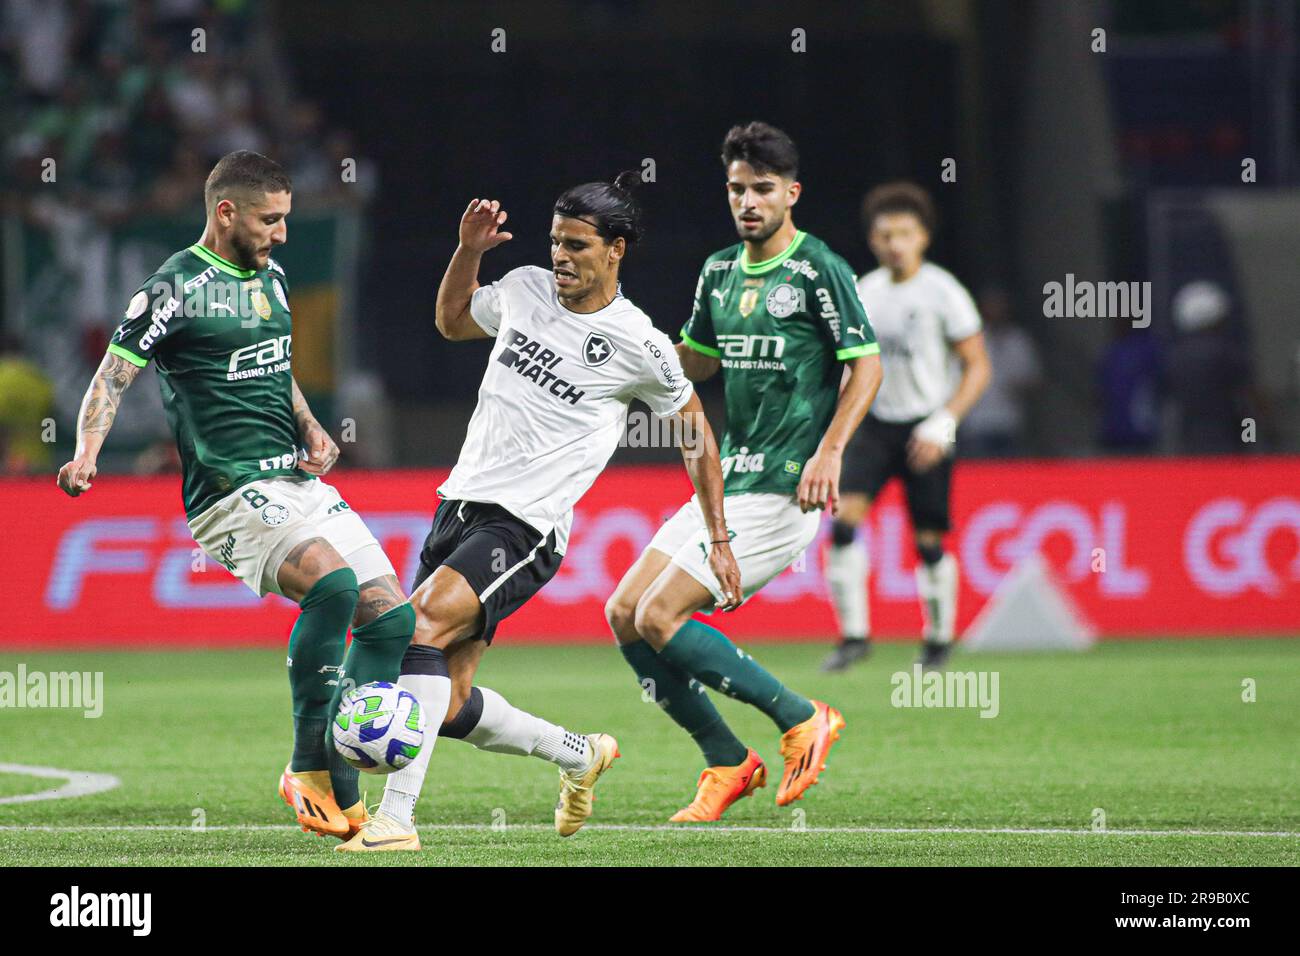 Sao Paulo, Brazil. 25th June, 2023. Ze Rafael of Palmeiras battles for possession with Victor Cuesta of Botafogo, during the match between Palmeiras and Botafogo, for the Brazilian Serie A 2023, at Allianz Parque Stadium, in Sao Paulo on June 25. Photo: Wanderson Oliveira/DiaEsportivo/Alamy Live News Credit: DiaEsportivo/Alamy Live News Stock Photo